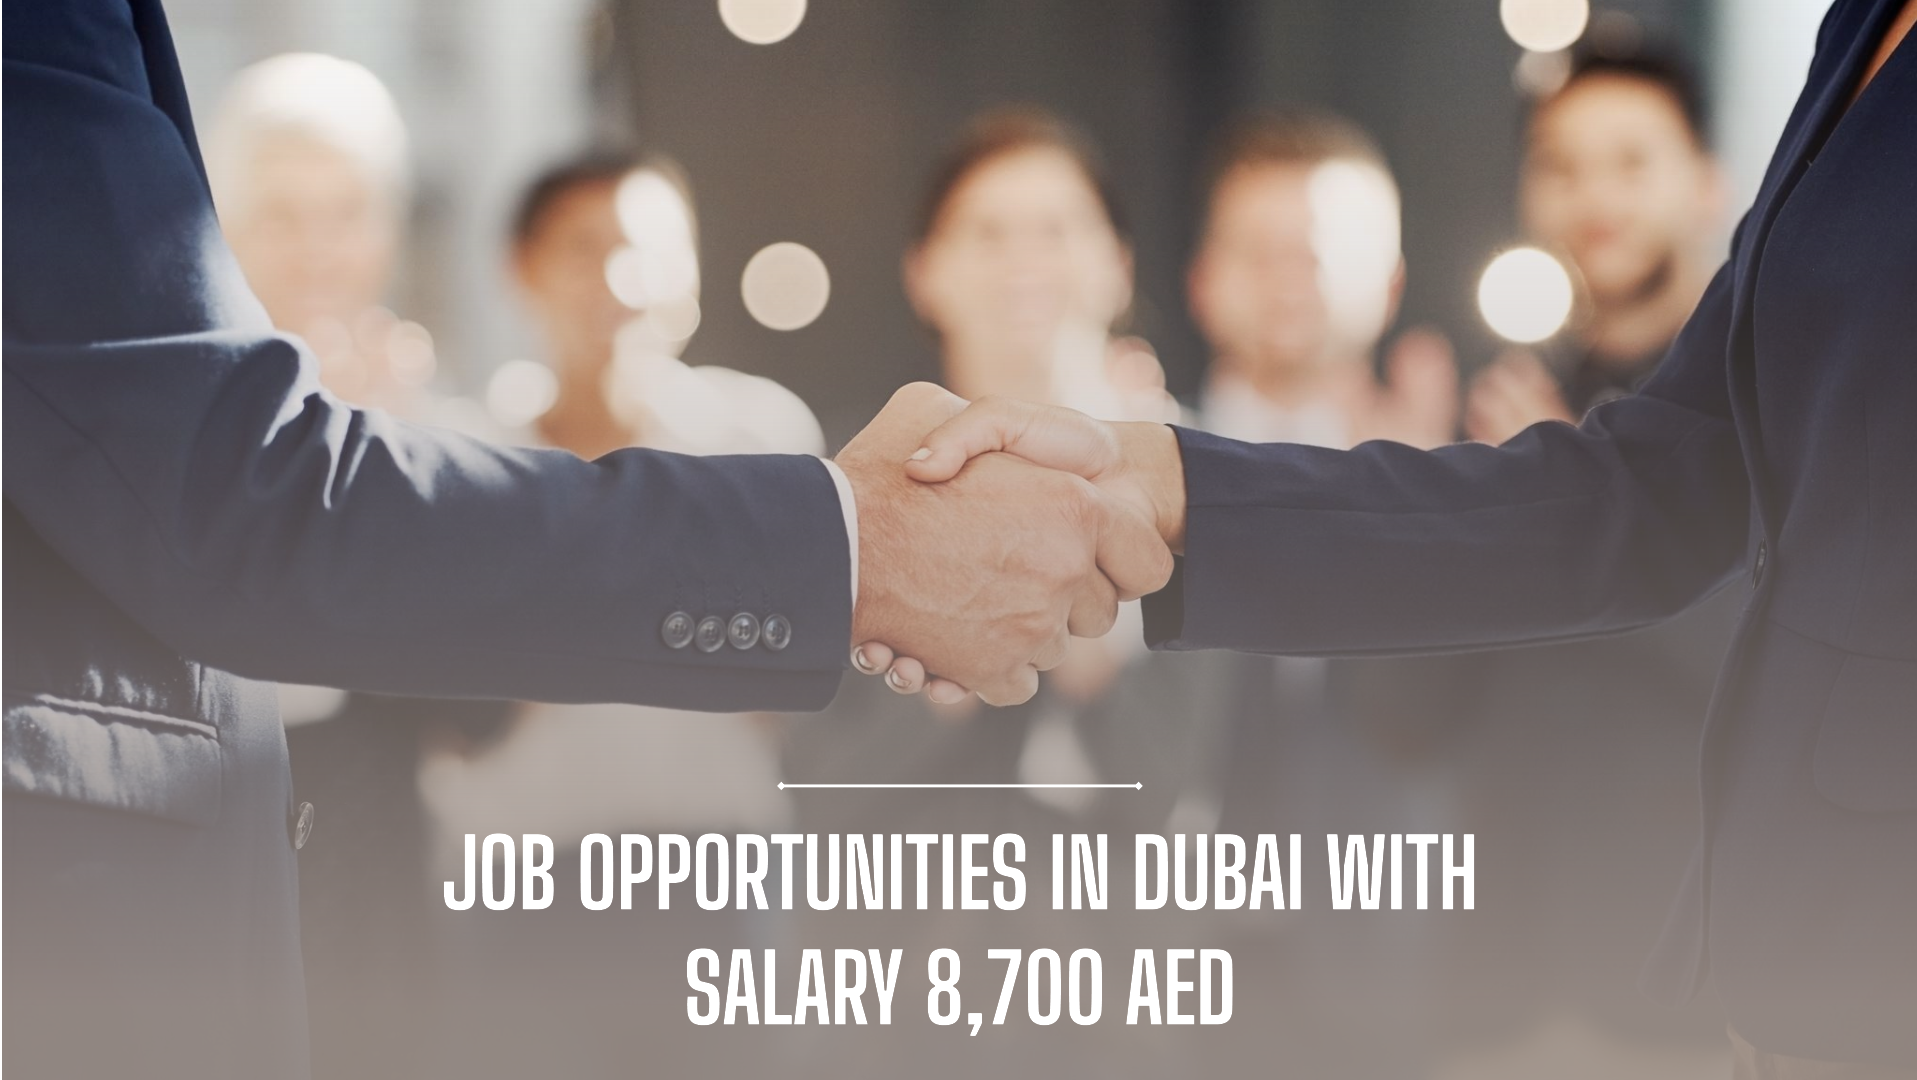 job opportunities in dubai with salary 8,700 AED